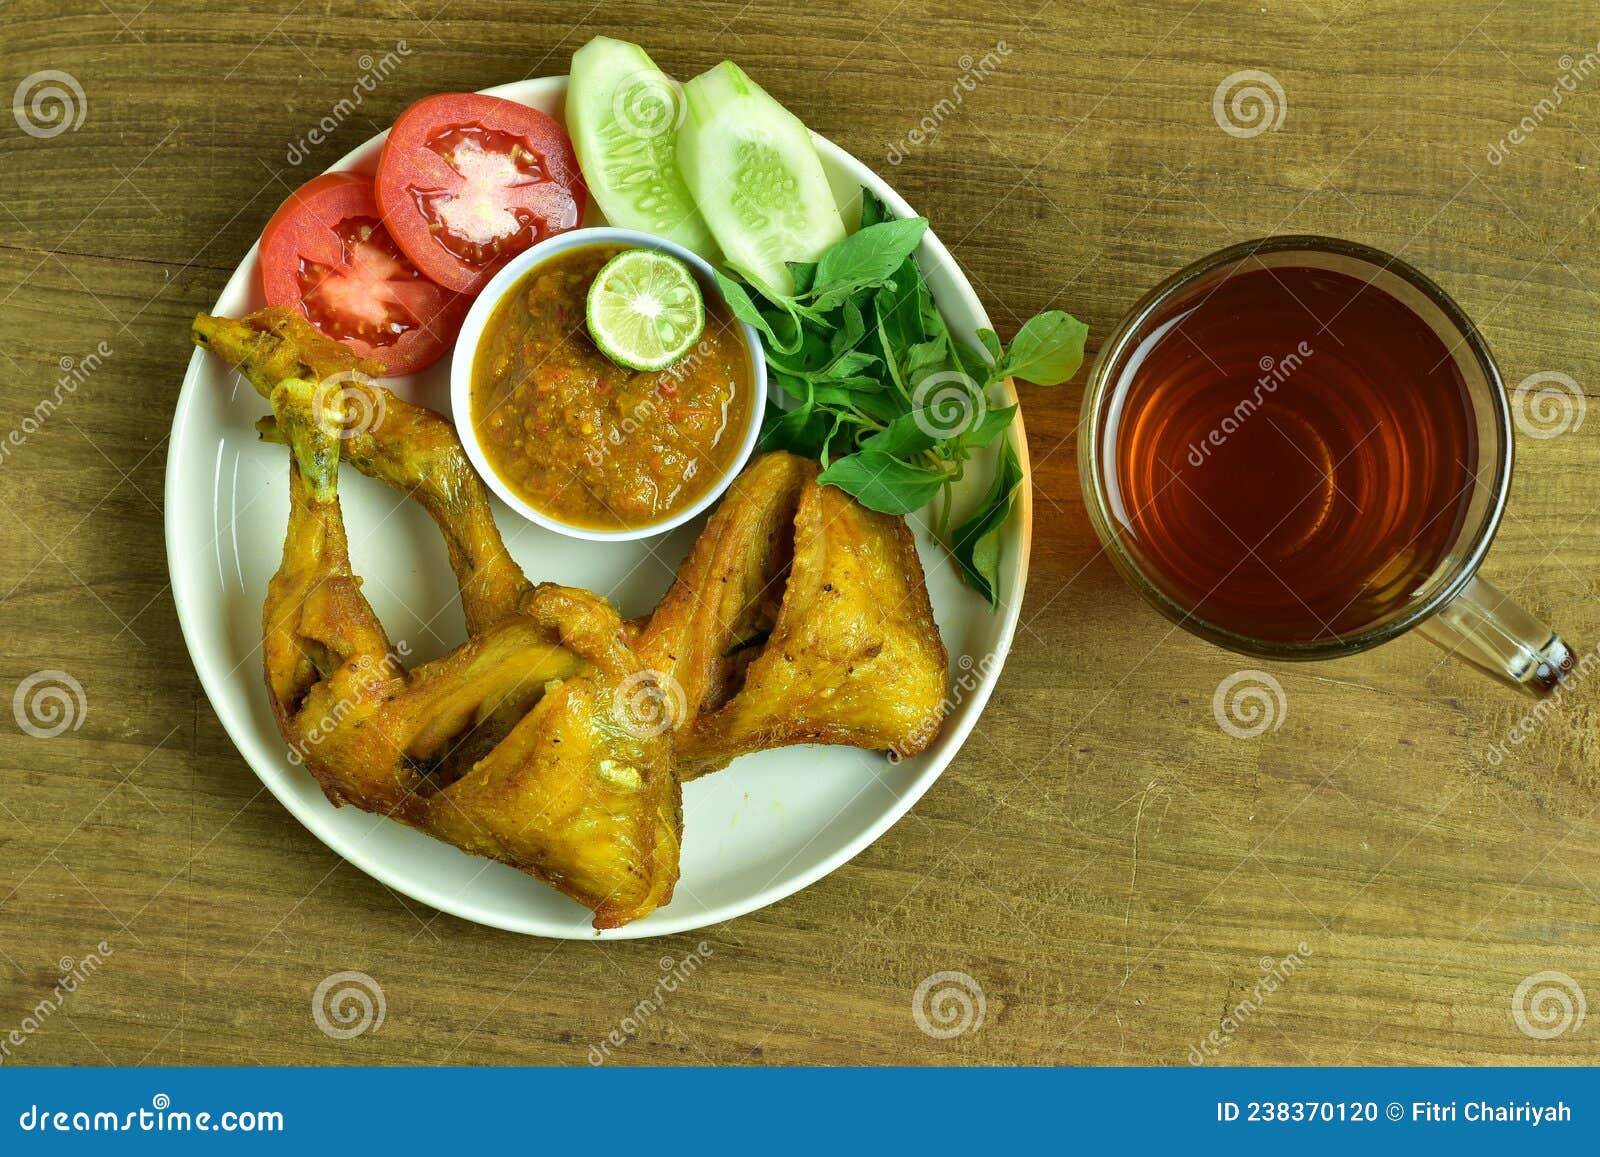 Pecel Ayam Fried Chicken With Sambal And Fresh Vegetables Stock Photo